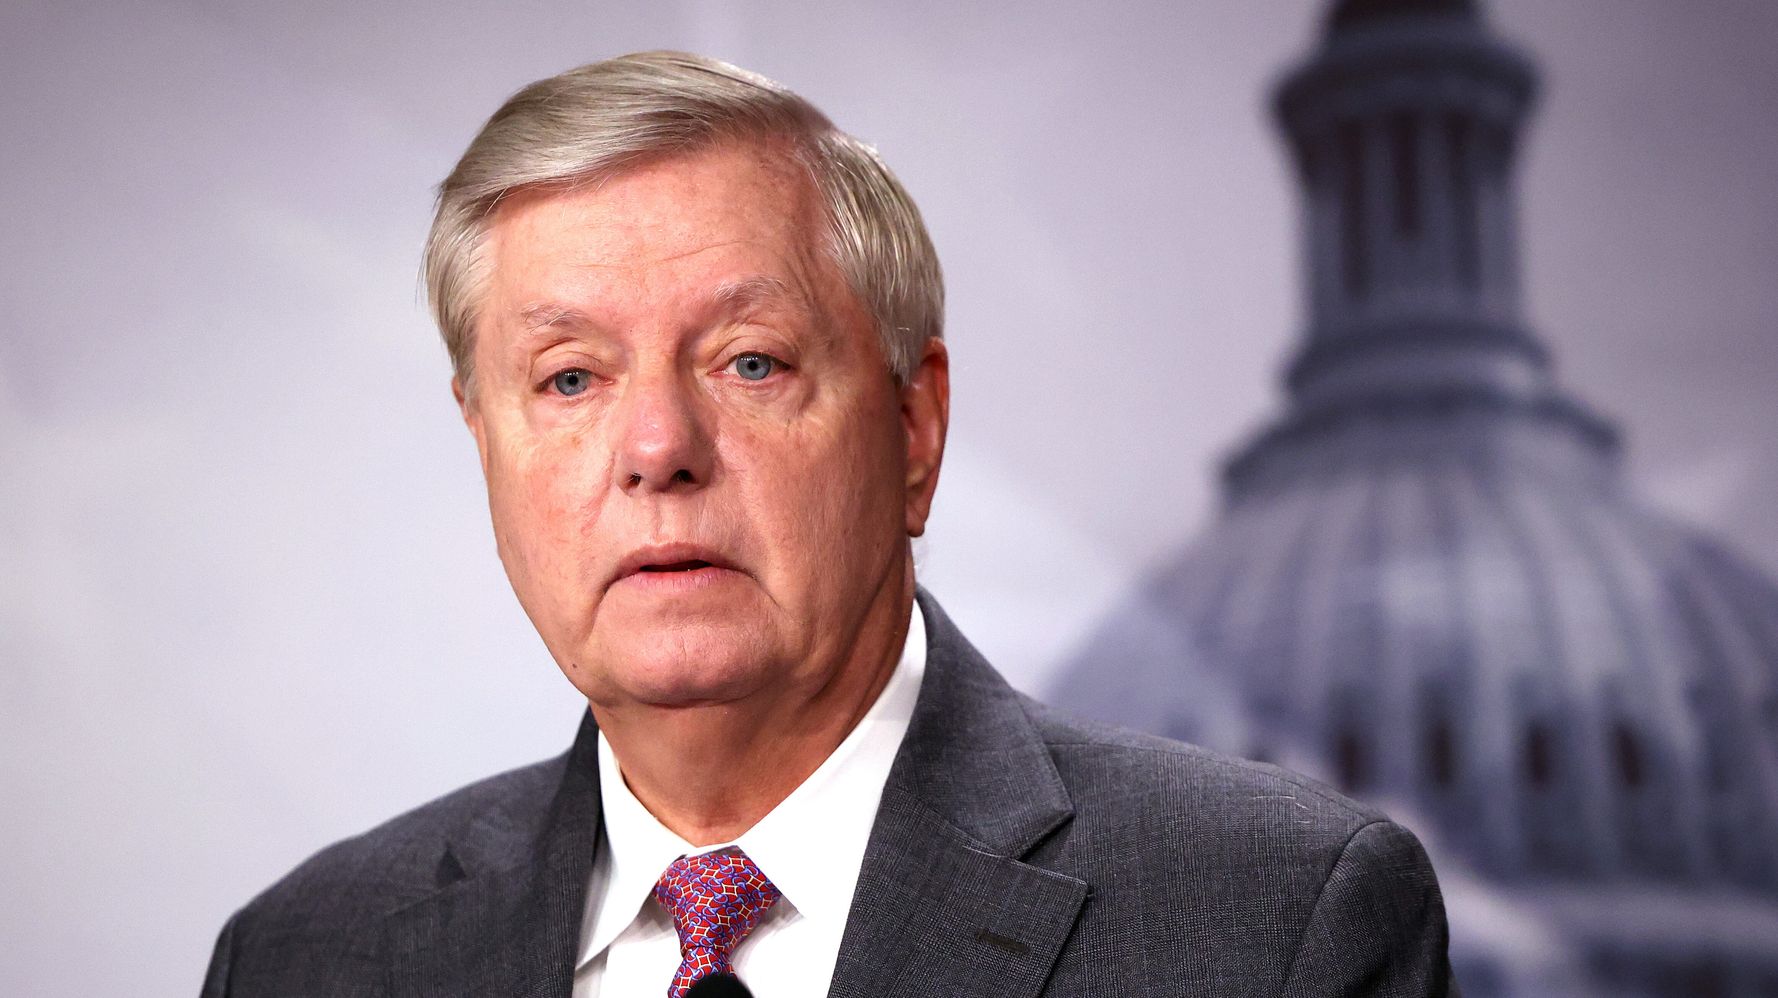 Sen. Lindsey Graham Says He's Tested Positive For COVID-19